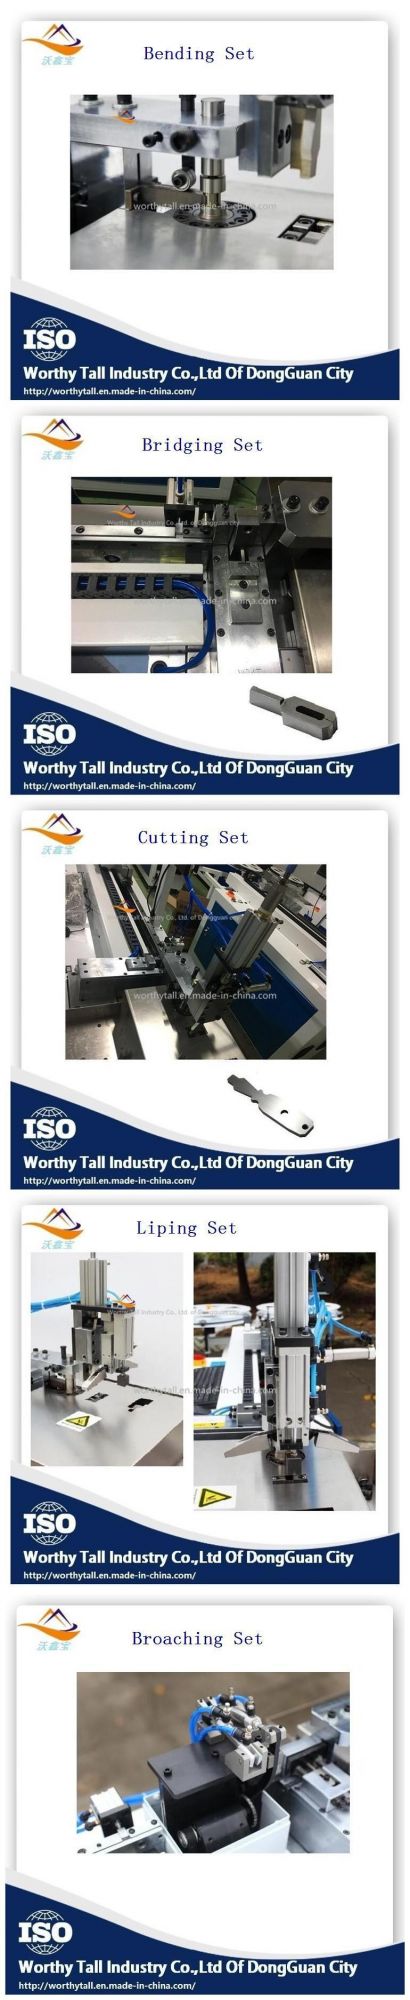 High Efficient Die Cutting Machine for Electric Industry